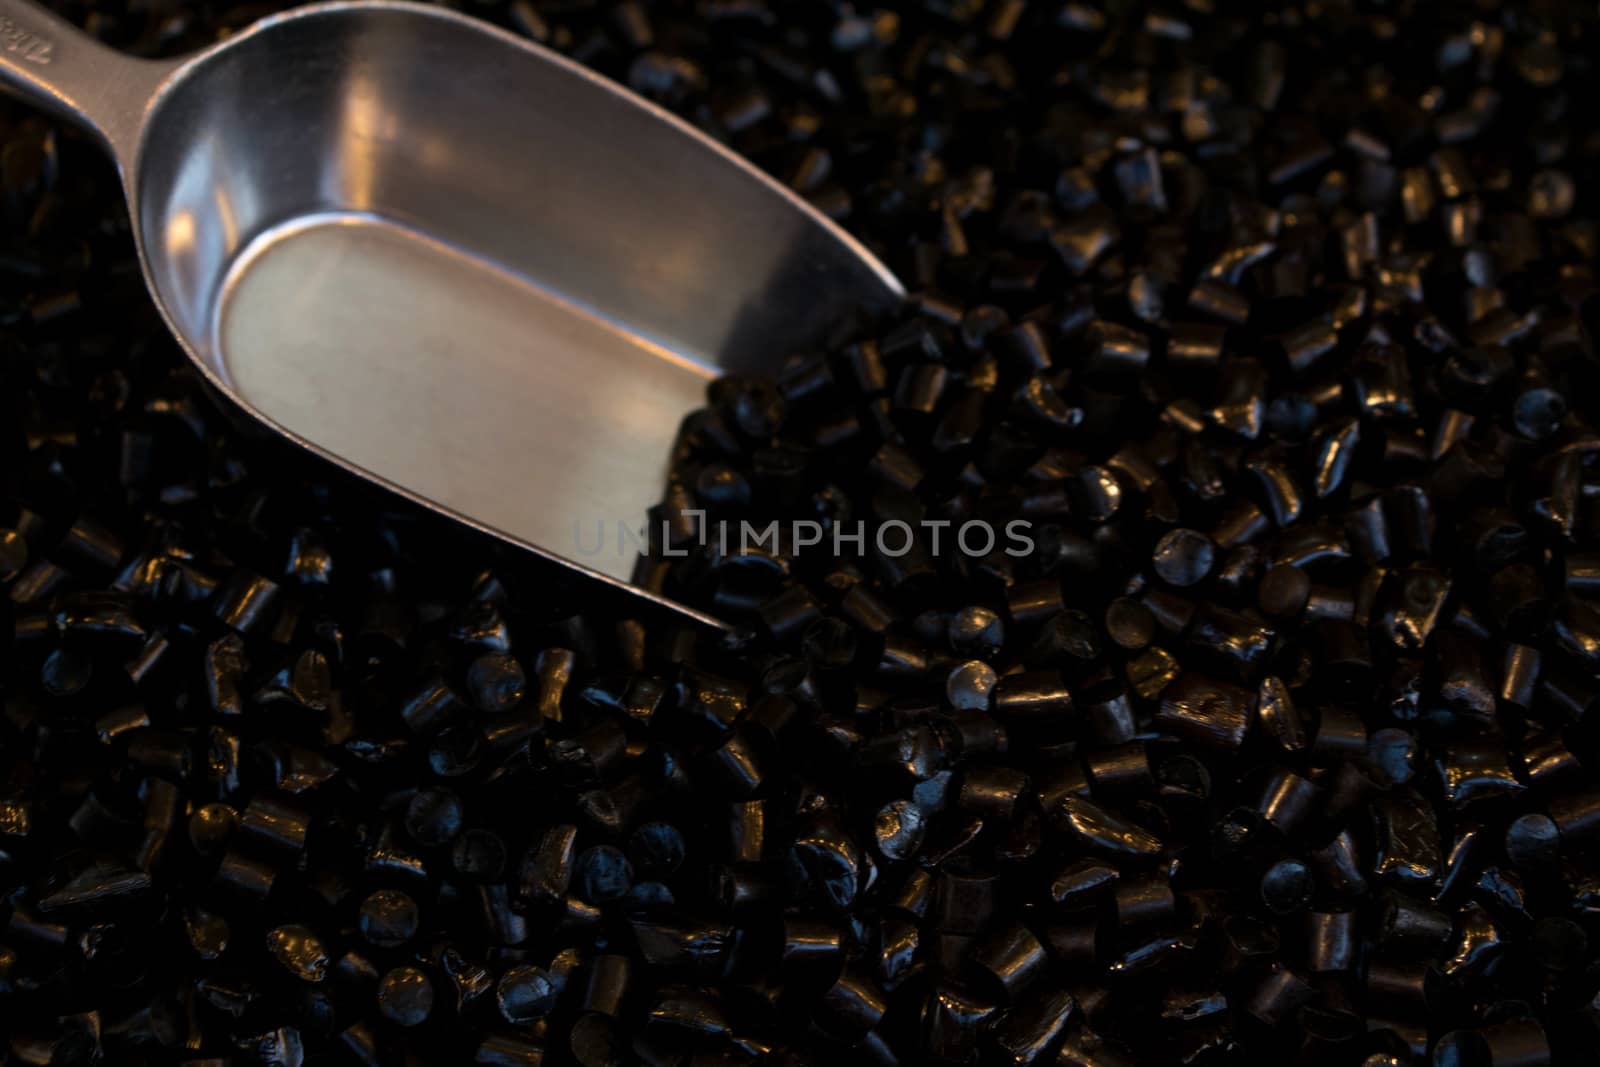 many liquorice pure candy, confectionery shop background